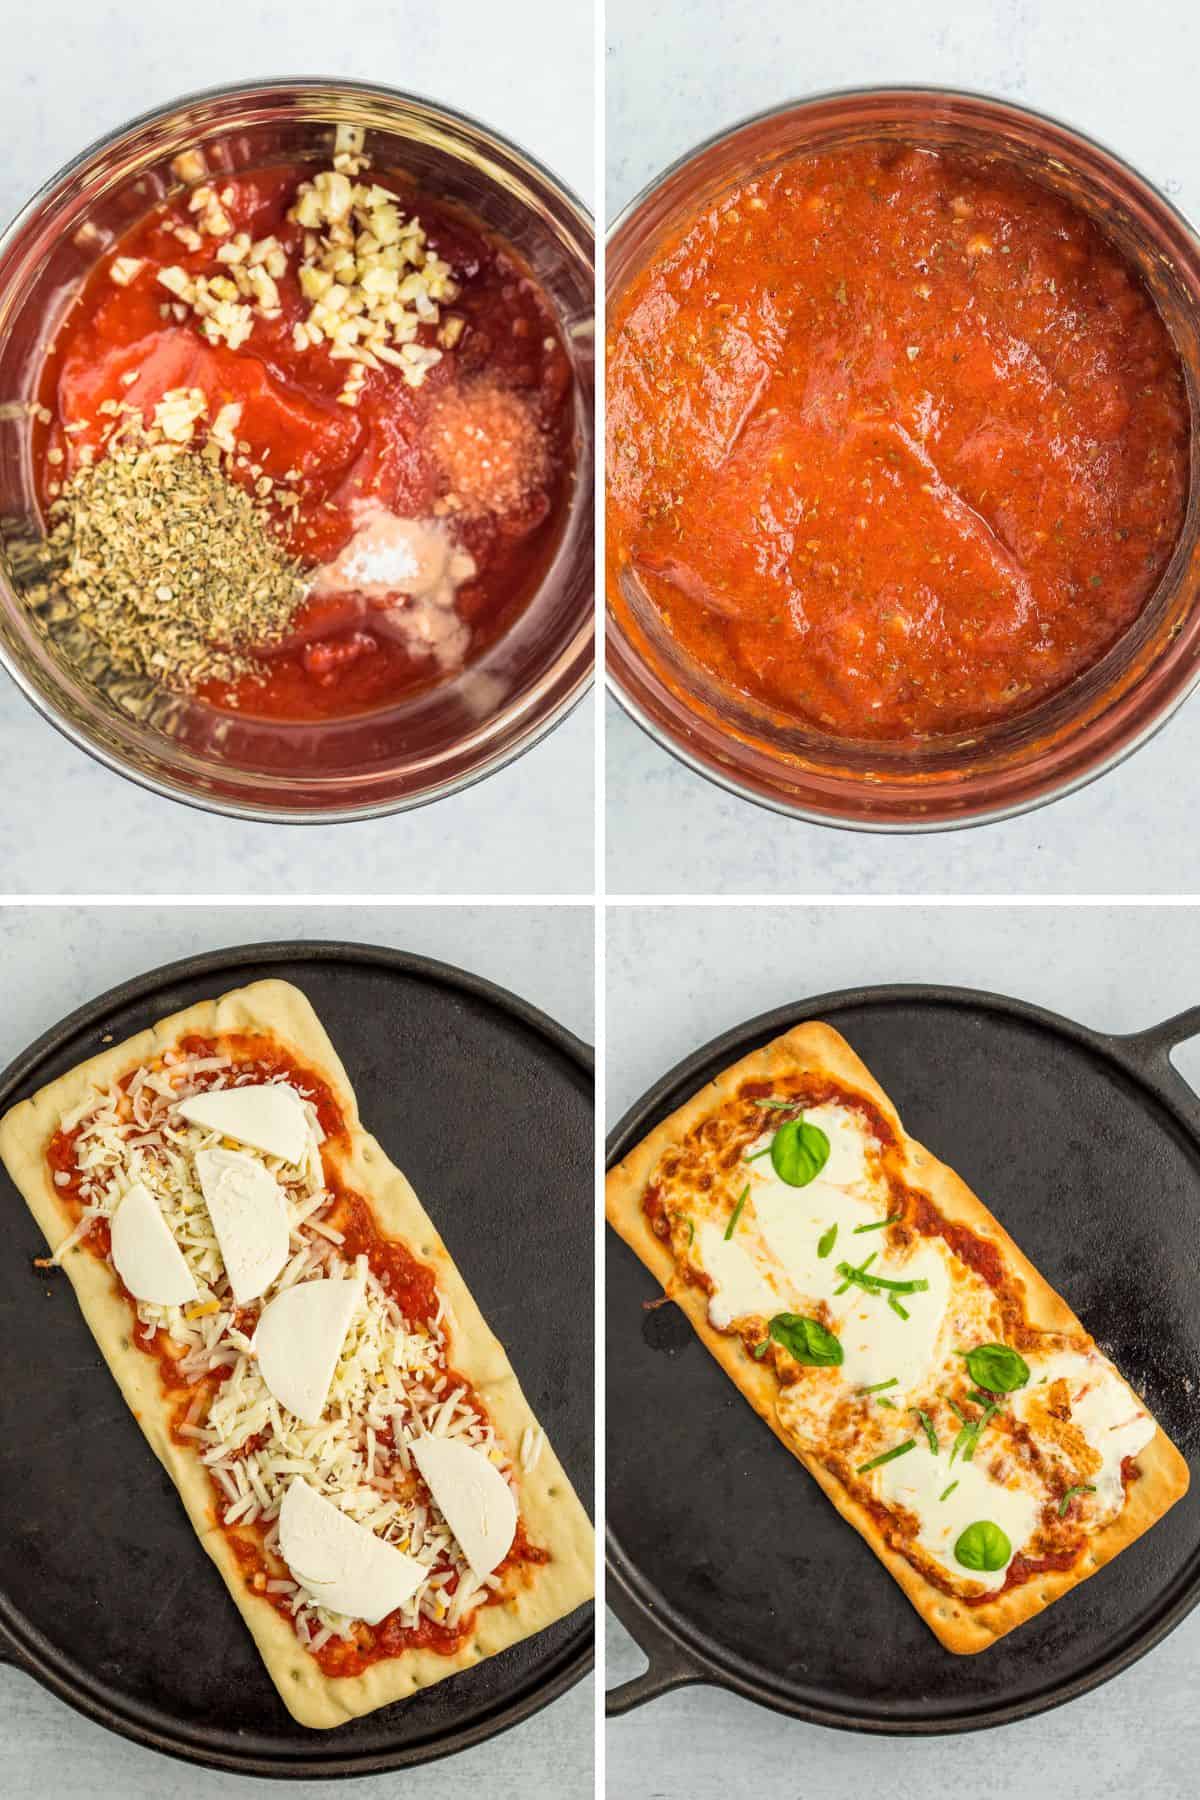 4 photos showing the process of making flatbread pizza.